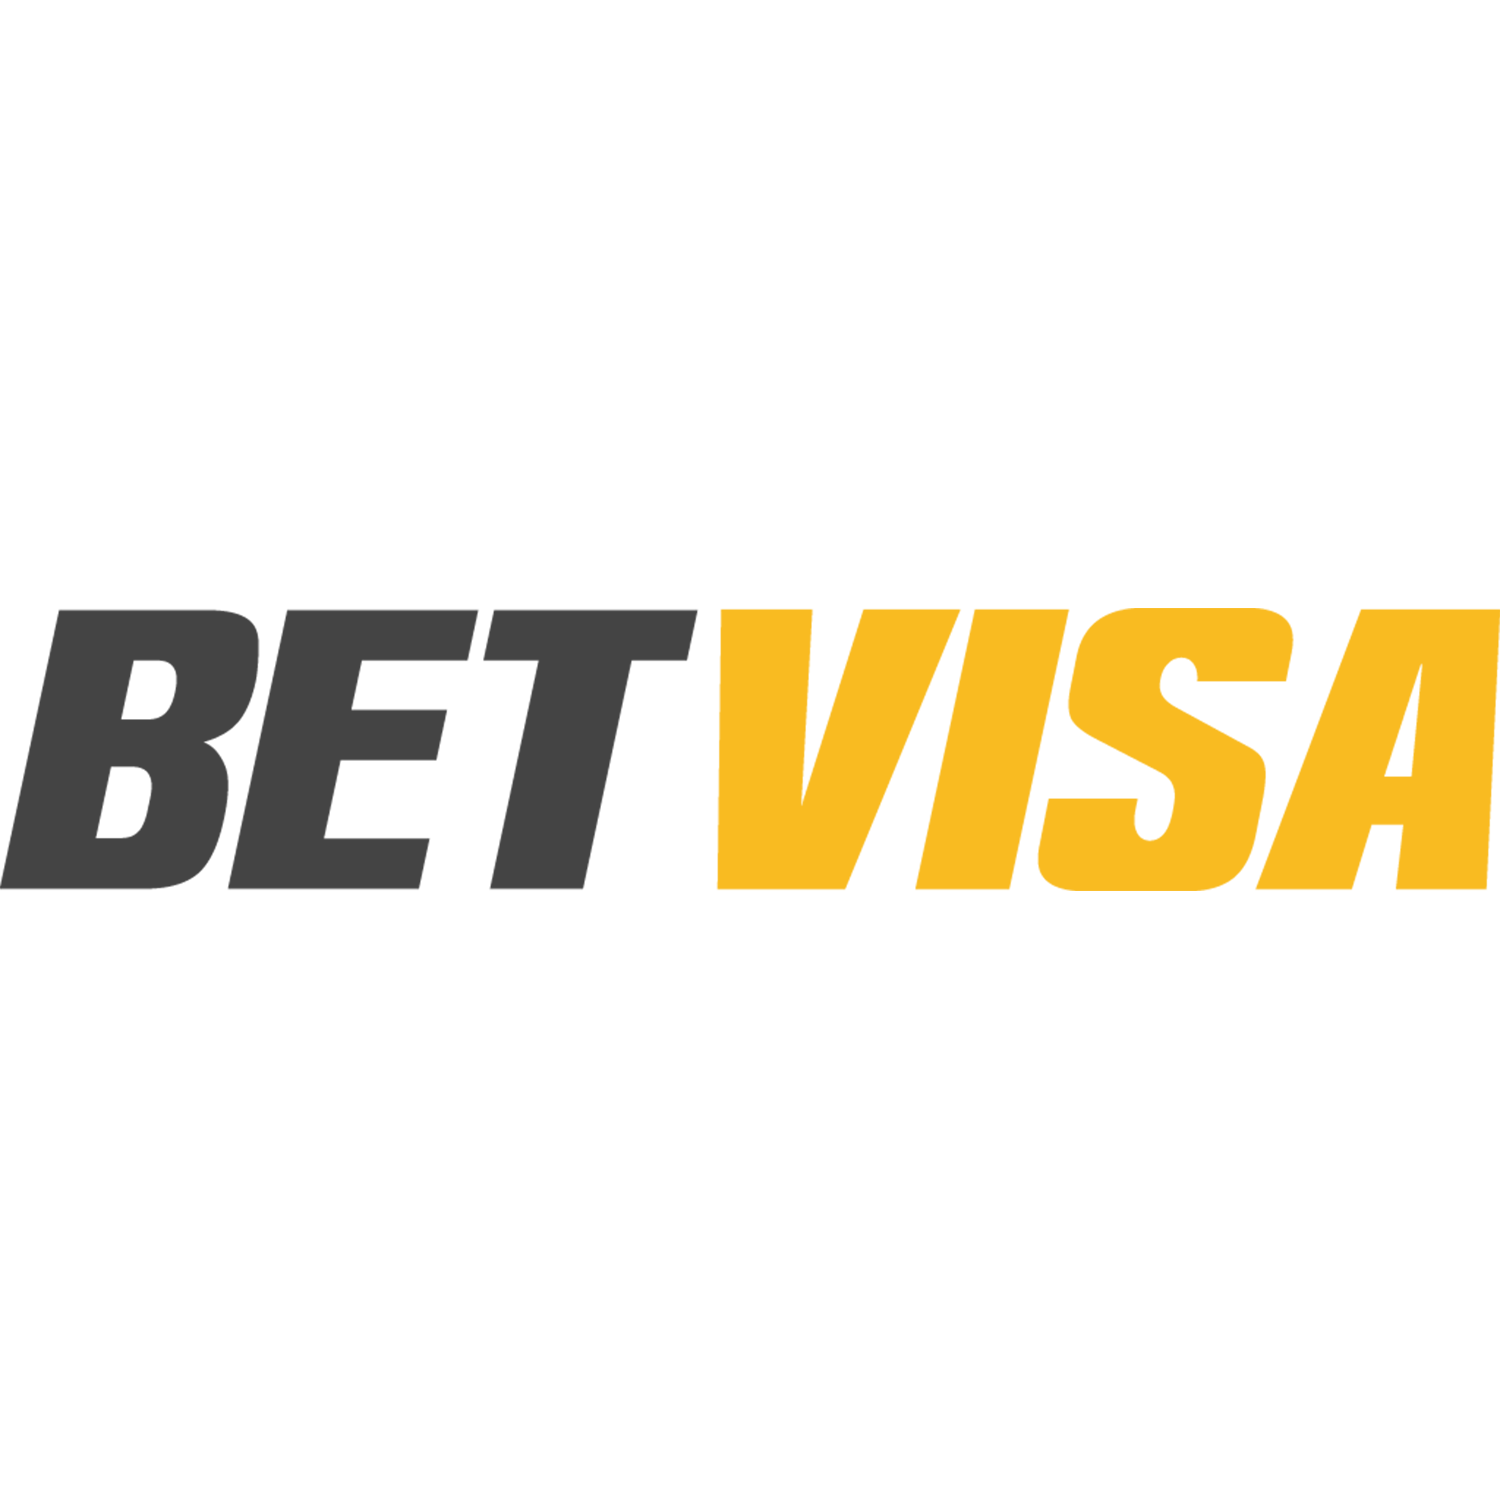 Betvisa is legal for betting on cricket matches in India.